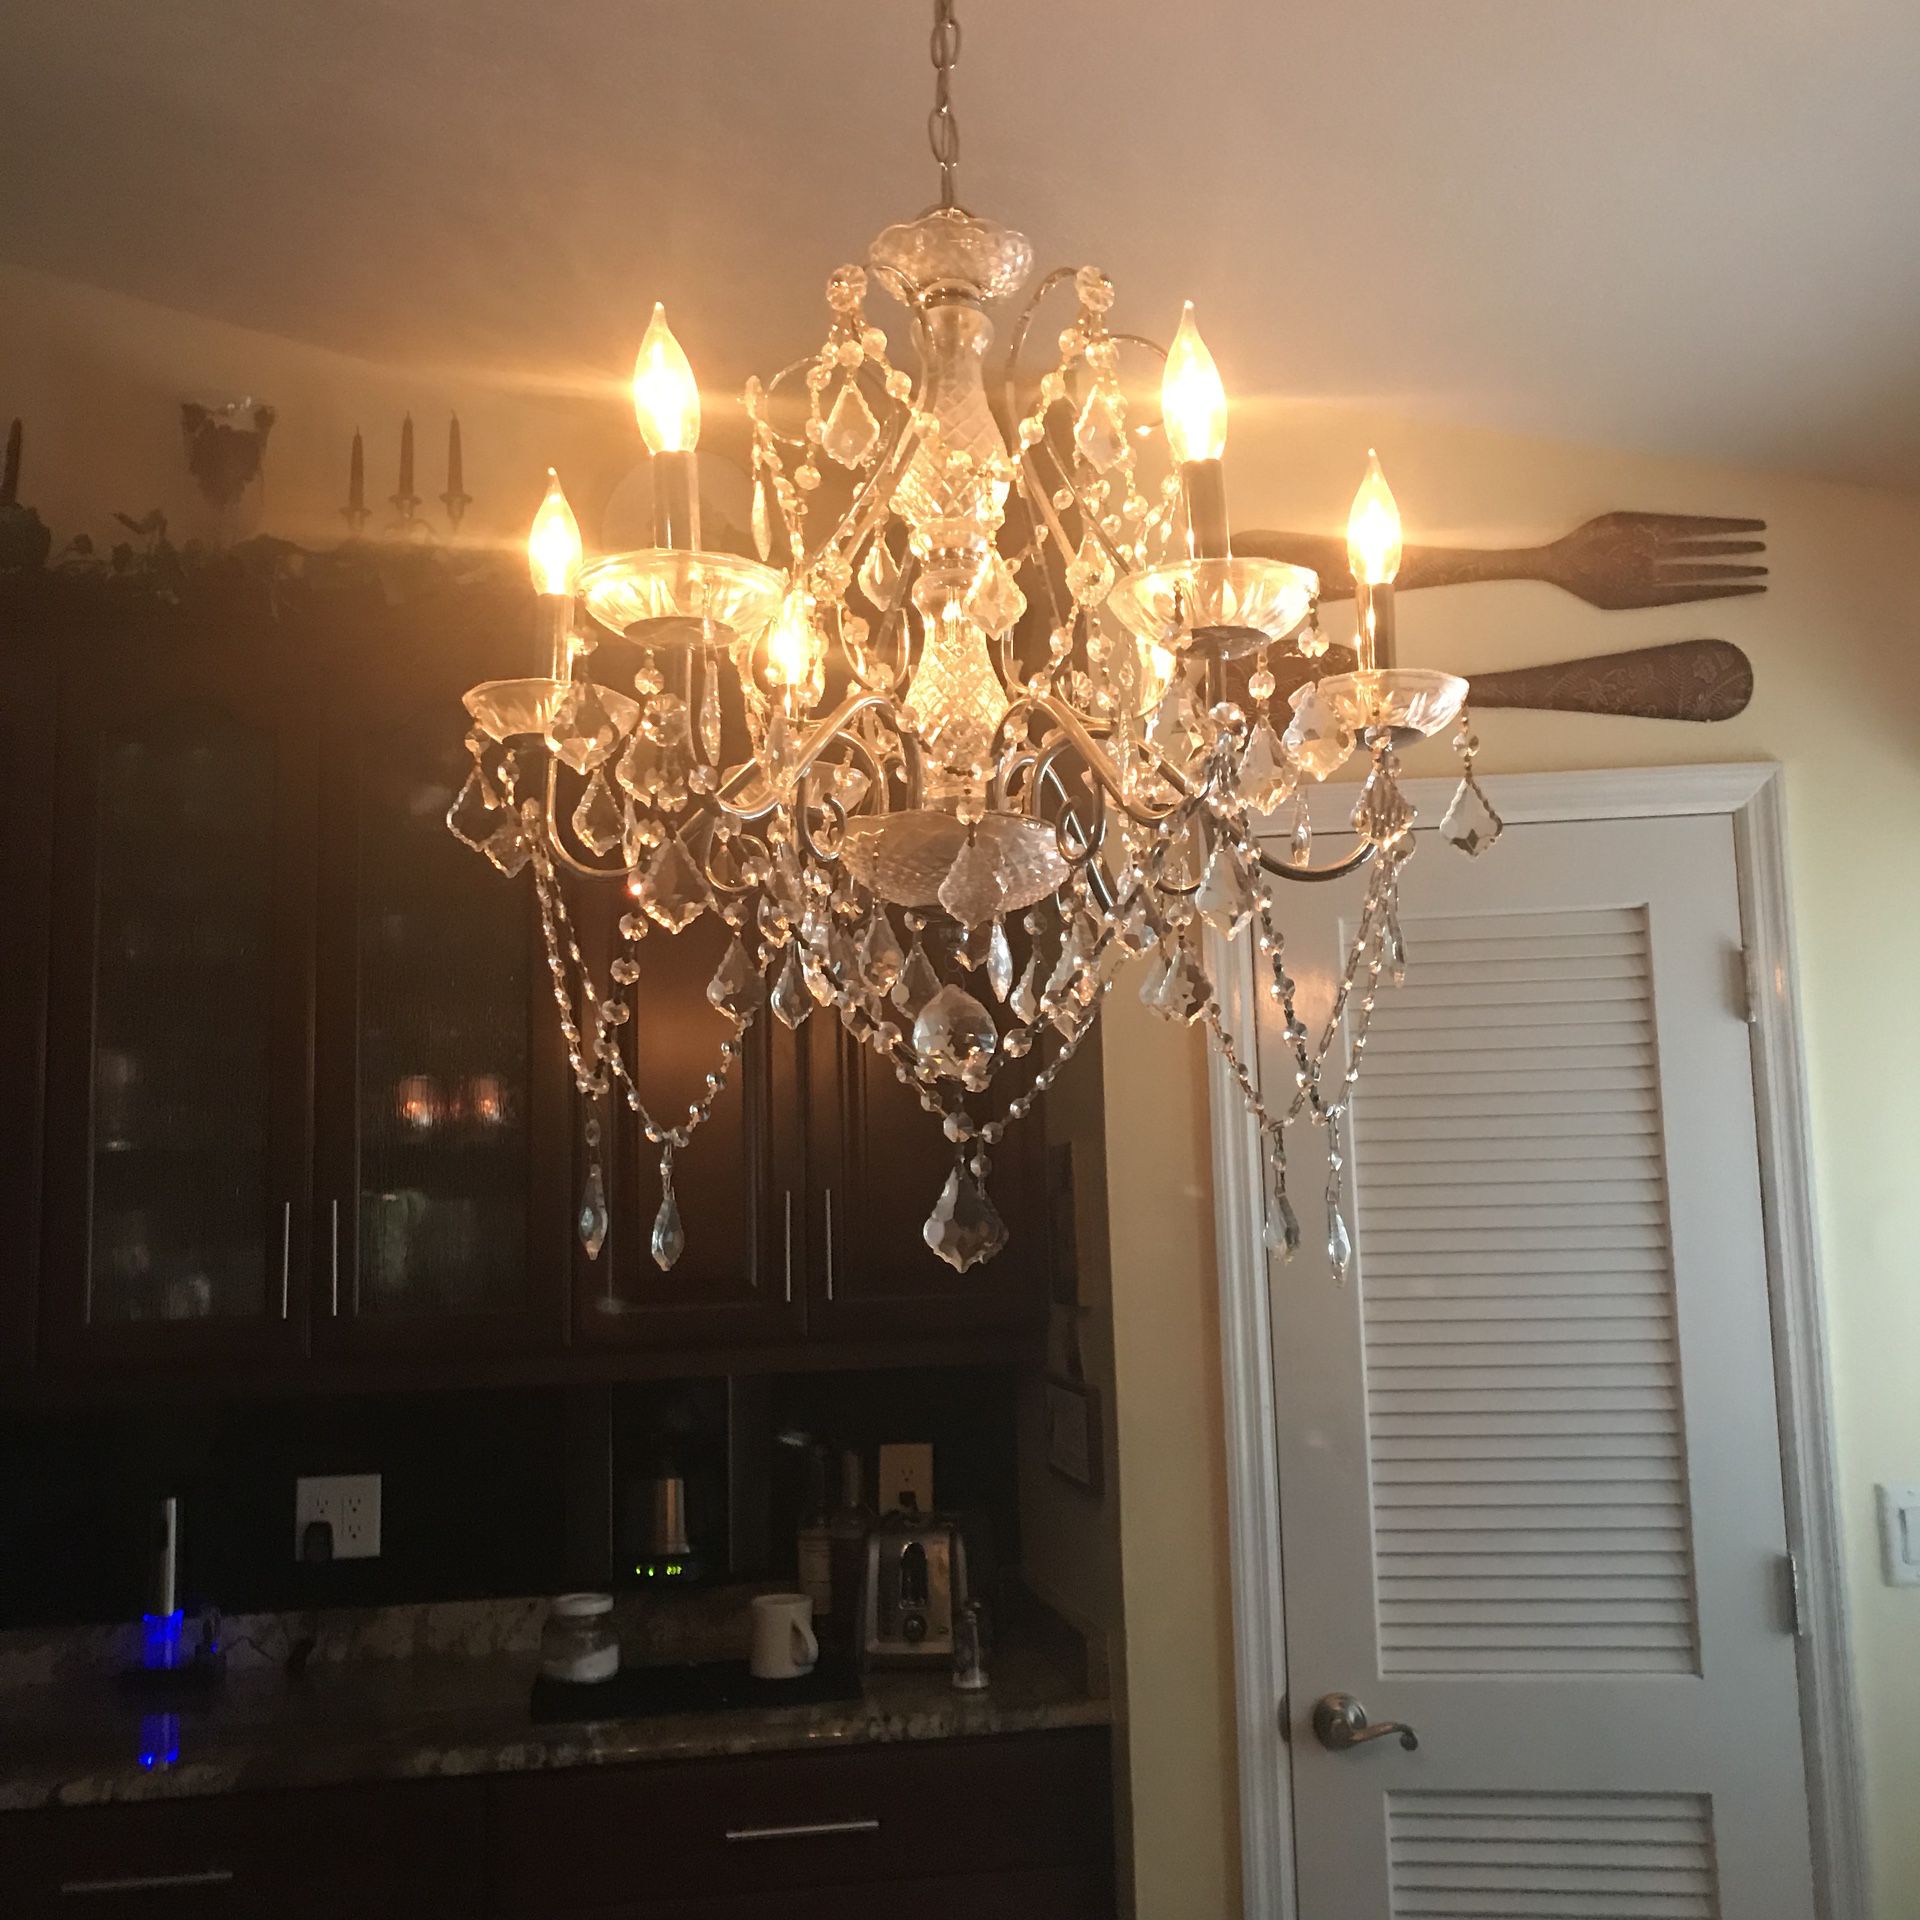 Crystal chandeliers matching